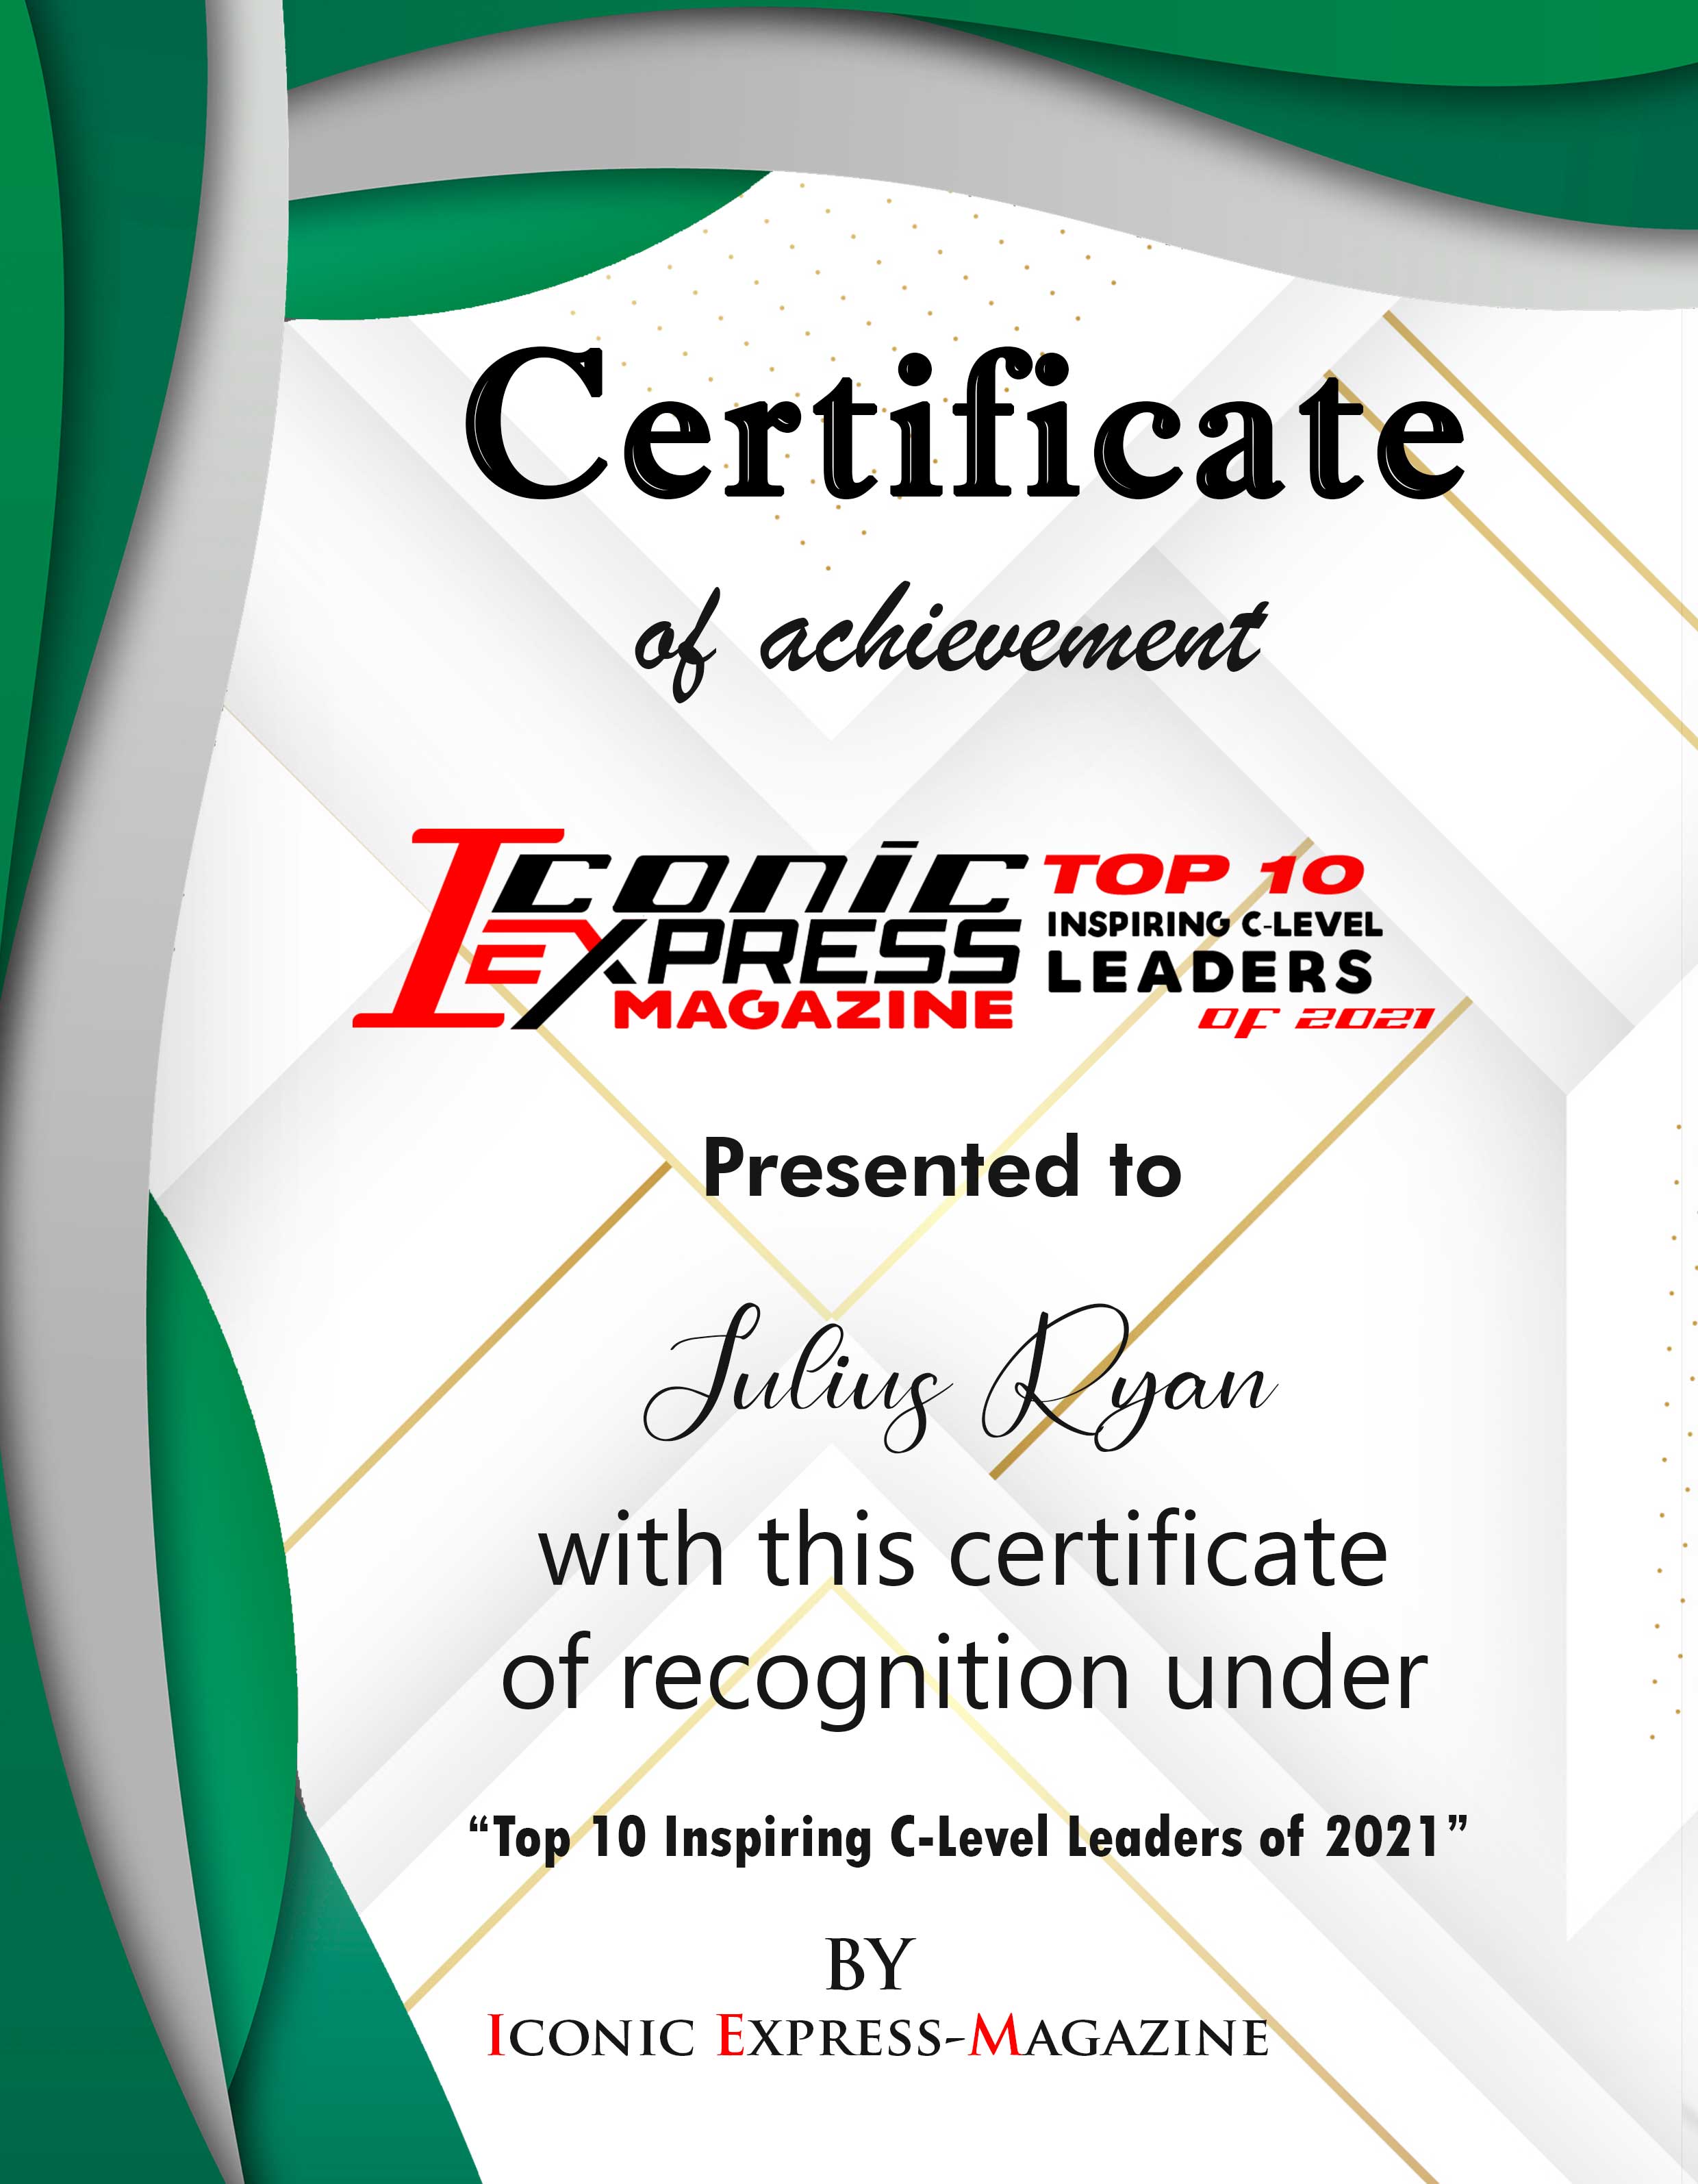 Julius Ryan, Chief Executive Officer & Business Coaching at ExploreMyPC, Certificate